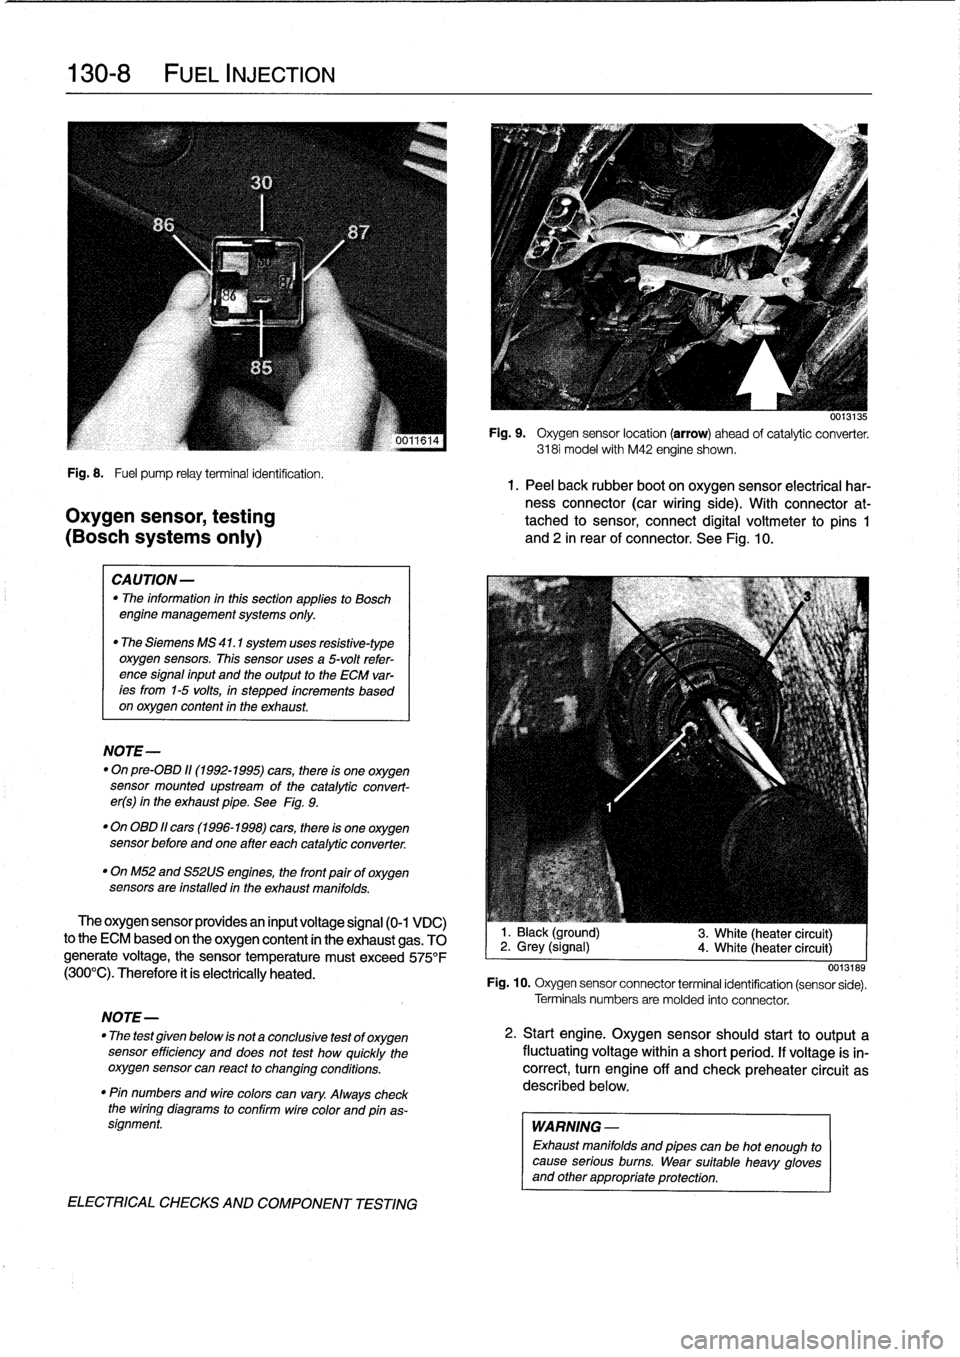 BMW 318i 1996 E36 Workshop Manual 
130-
8

	

FUEL
INJECTION

Fig
.
8
.

	

Fuel
pump
relayterminal
identification
.
1.
Peel
back
rubber
boot
on
oxygen
sensor
electrical
har-
ness
connector
(car
wiring
side)
.
With
connector
at-
Oxyge